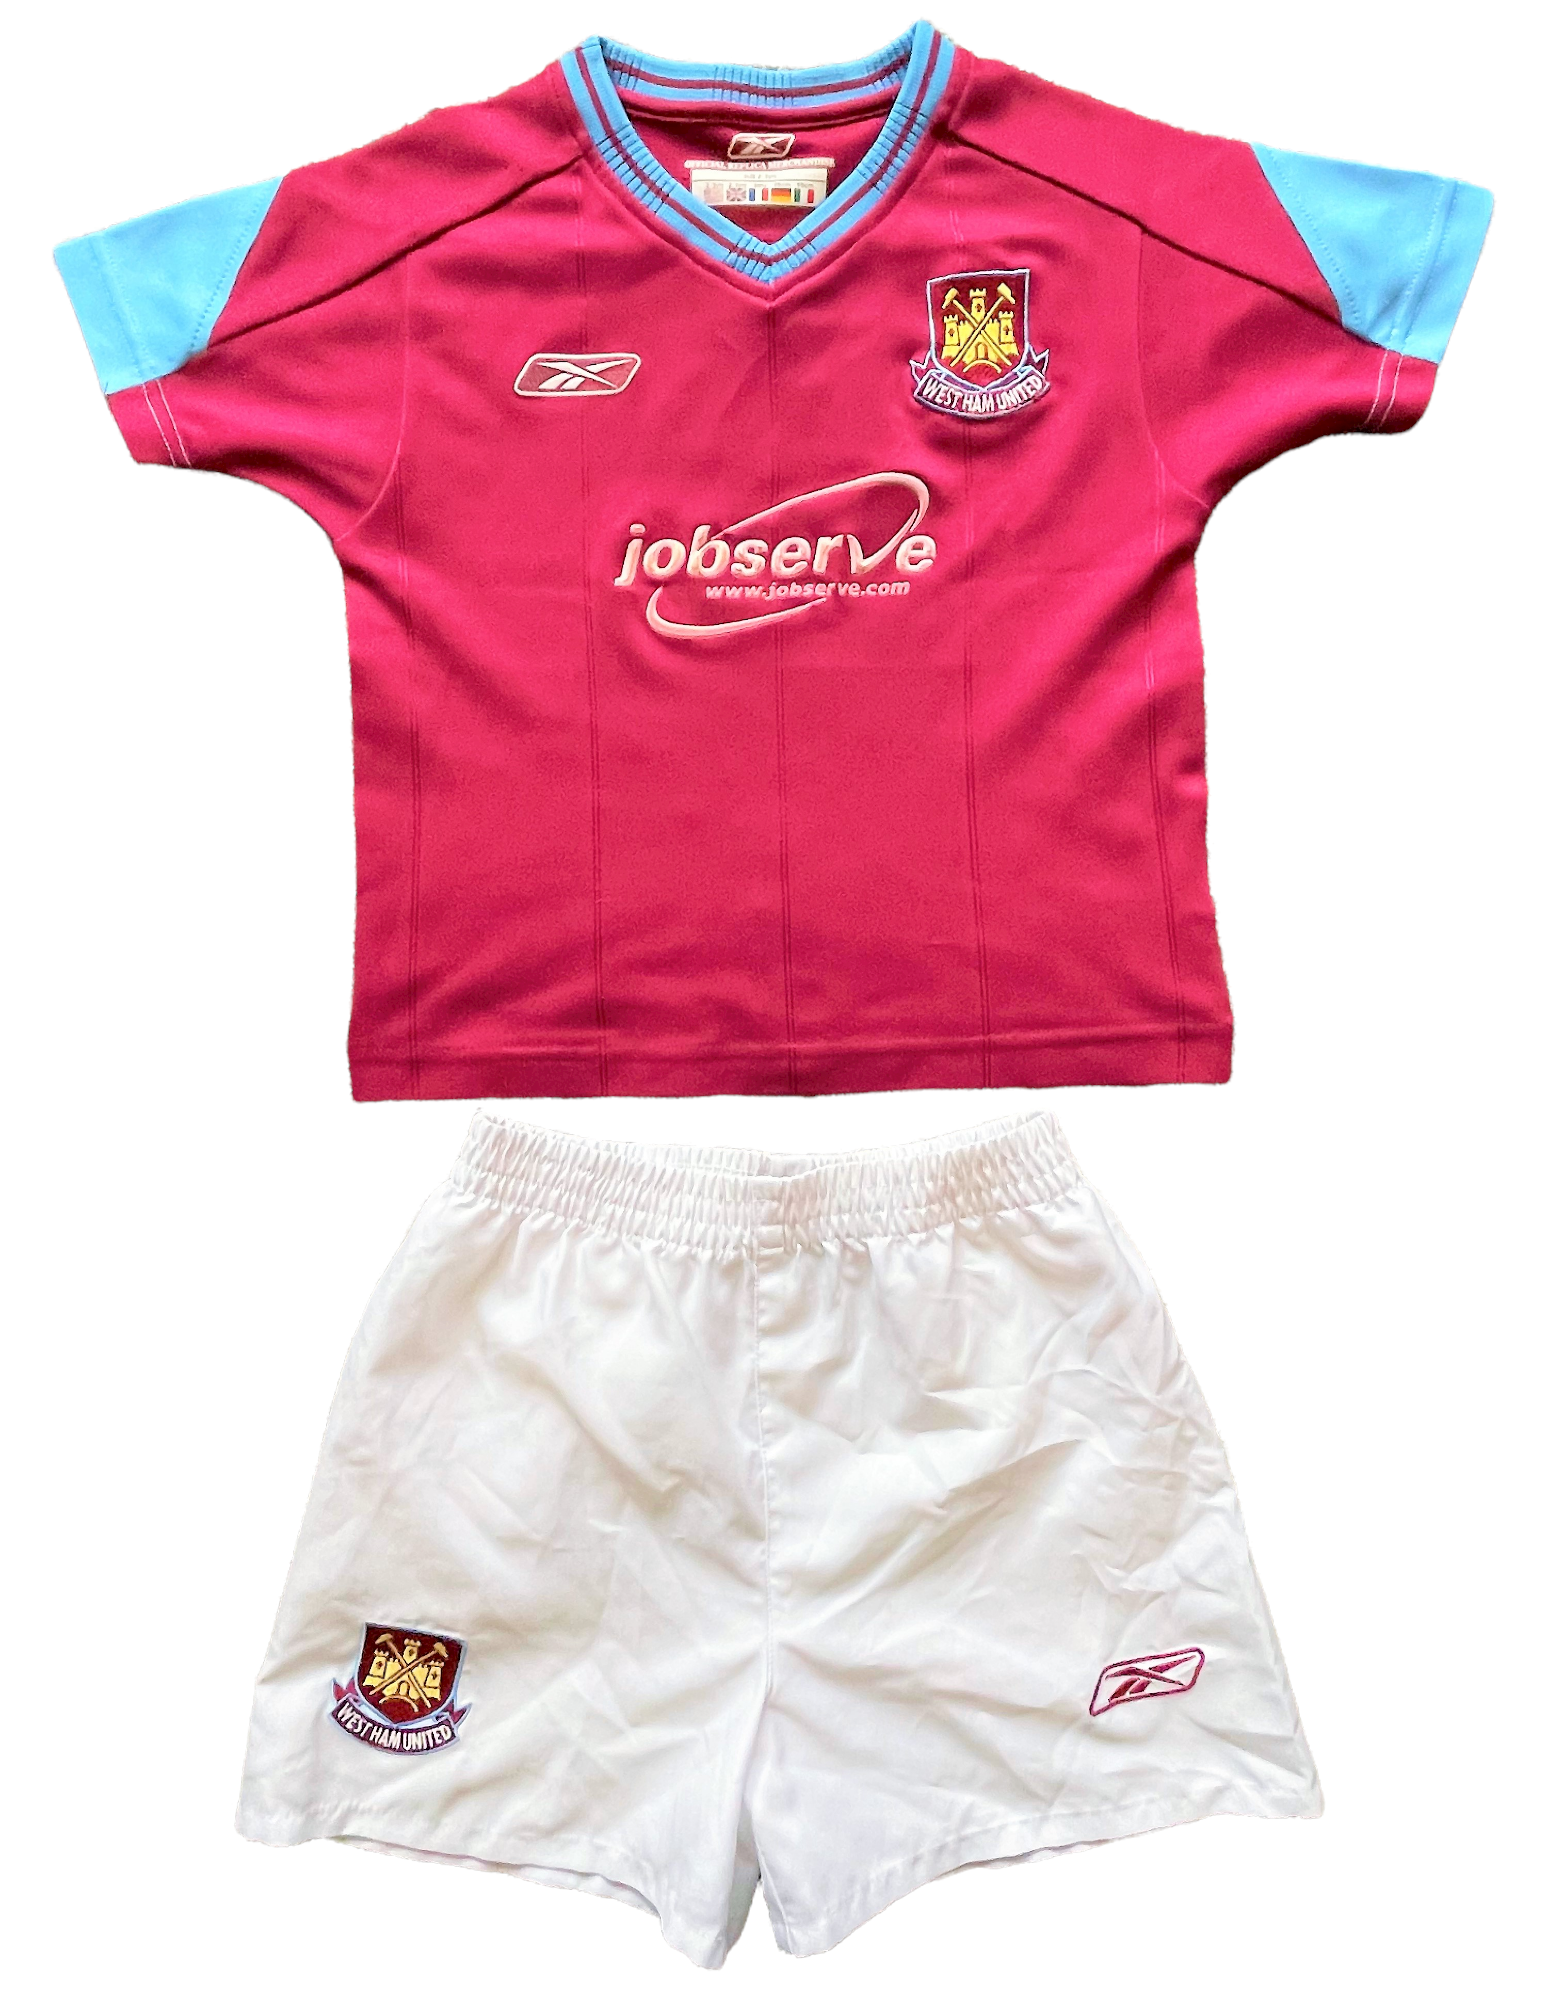 2003-05 West Ham shirt & shorts (excellent) Childs 2-3 years